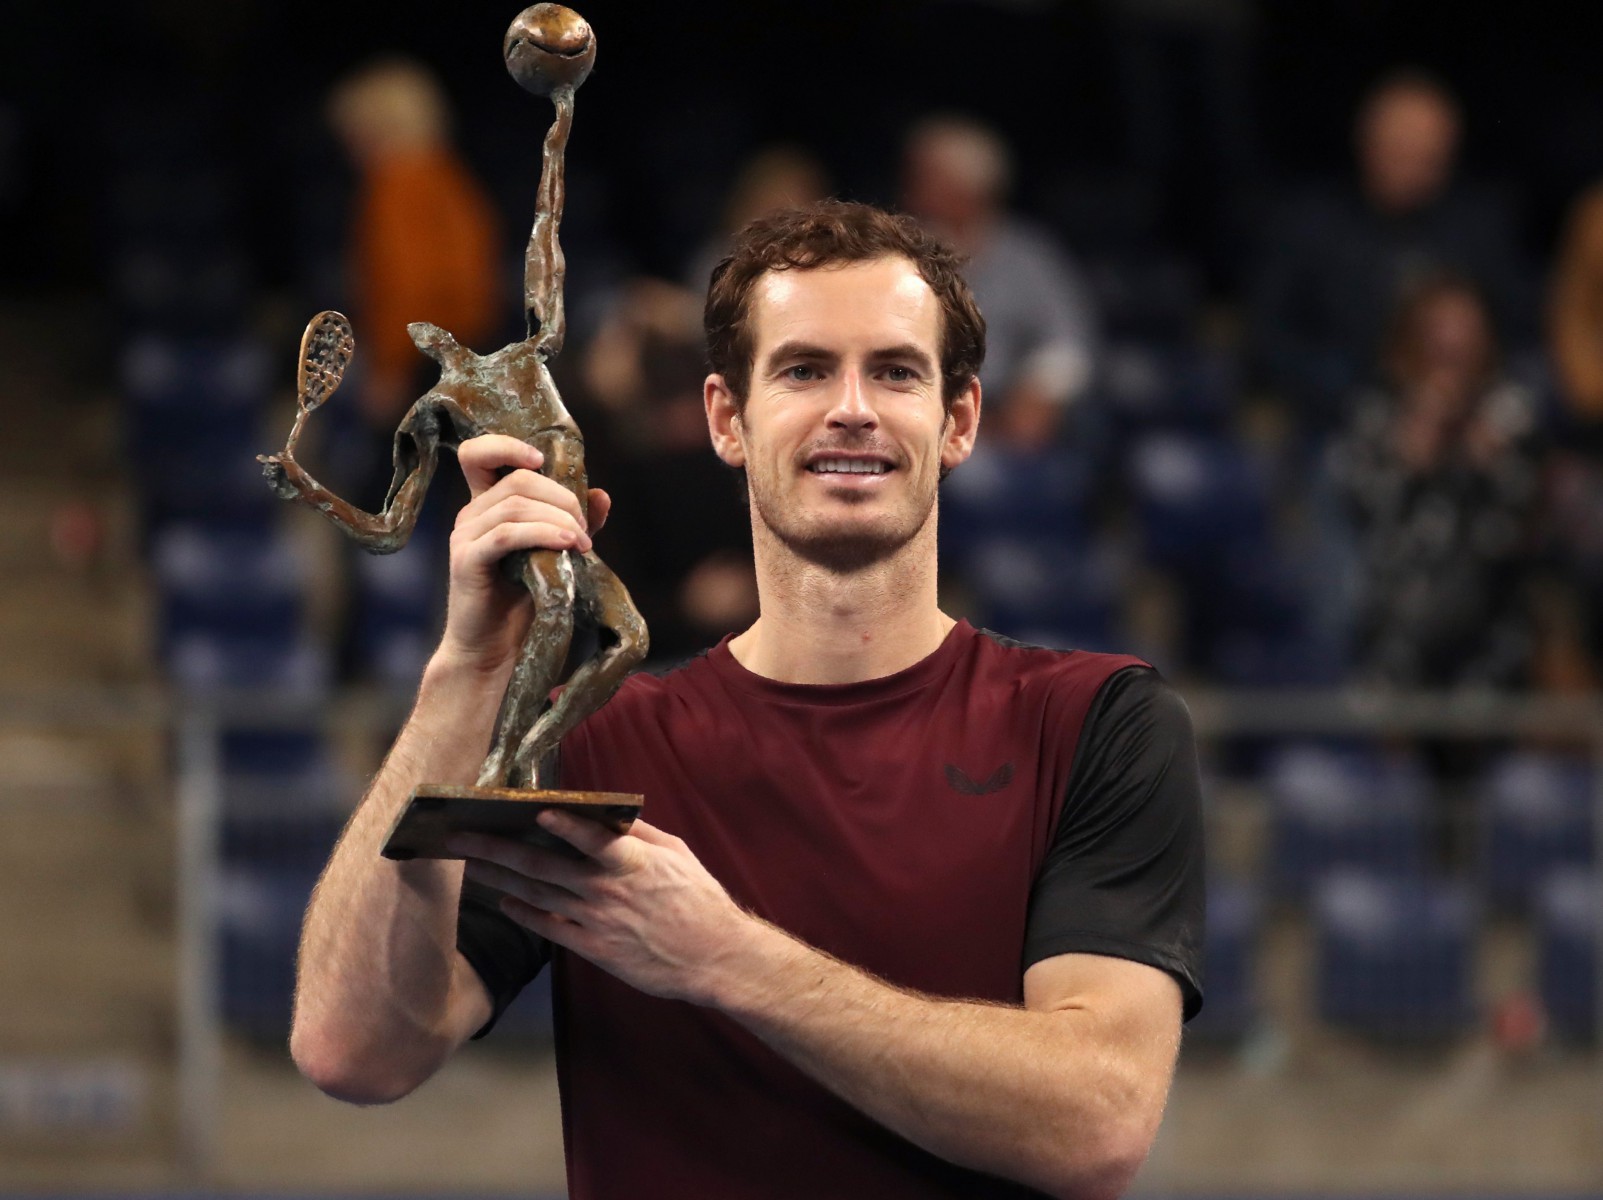 , Andy Murray breaks down in tears as he wins European Open to complete astonishing comeback after hip surgery